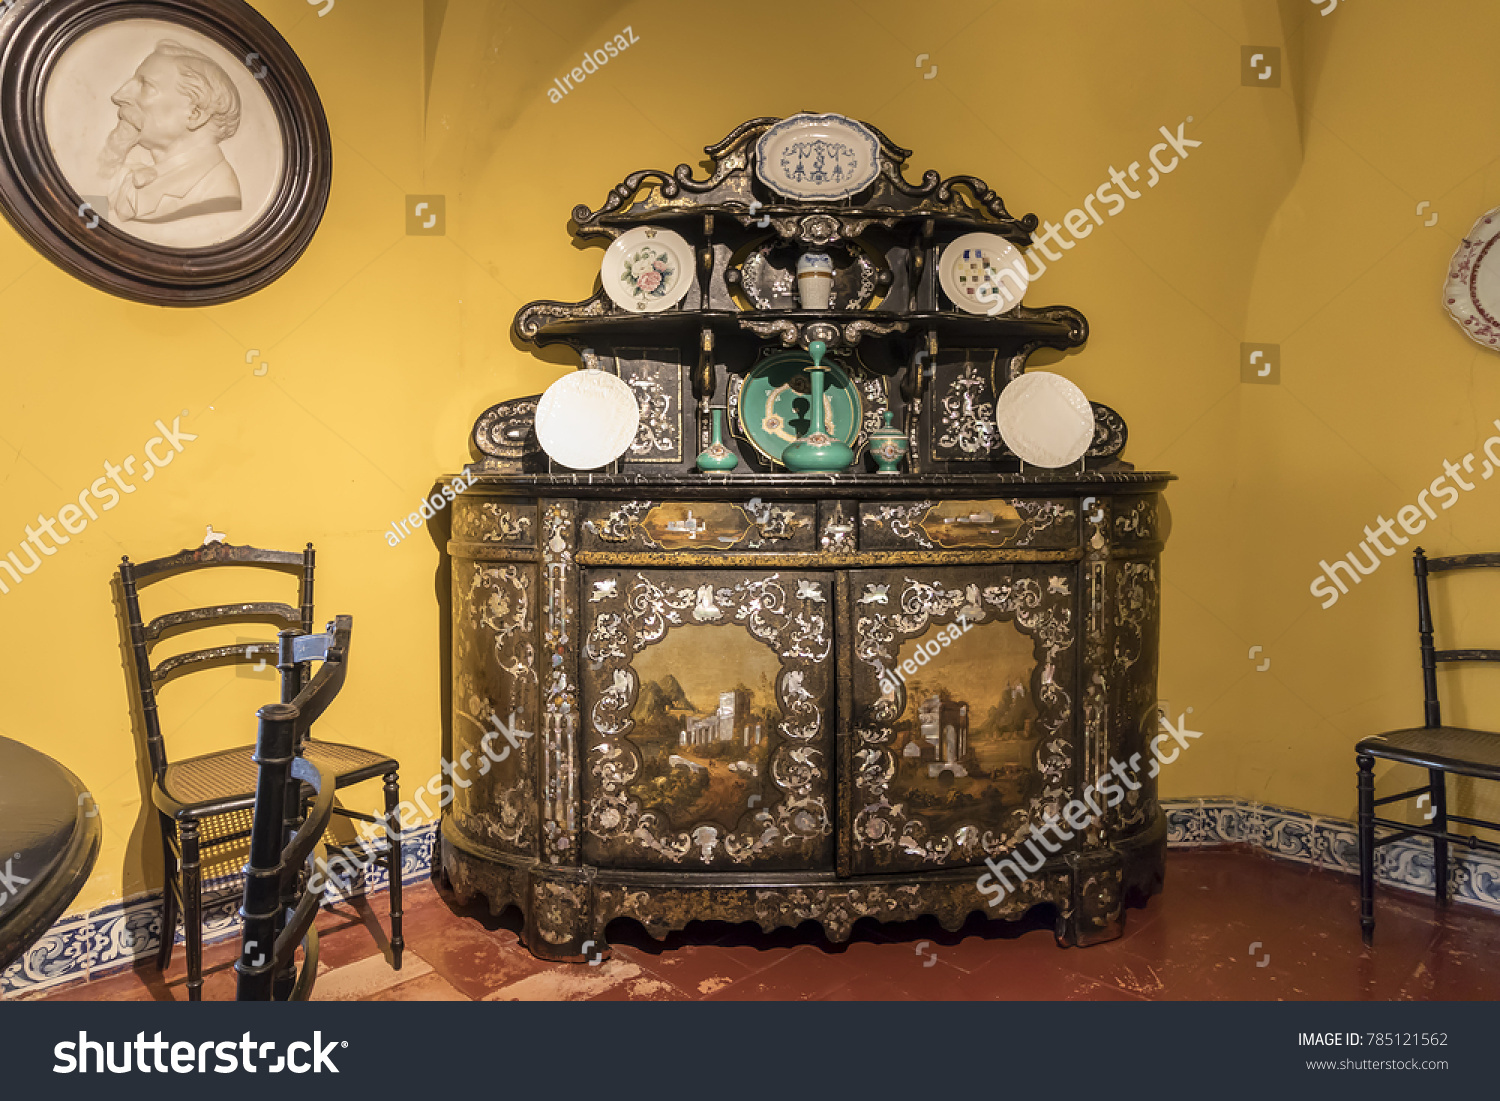 Set Furniture Made Paper Mache Inset Stock Photo Edit Now 785121562